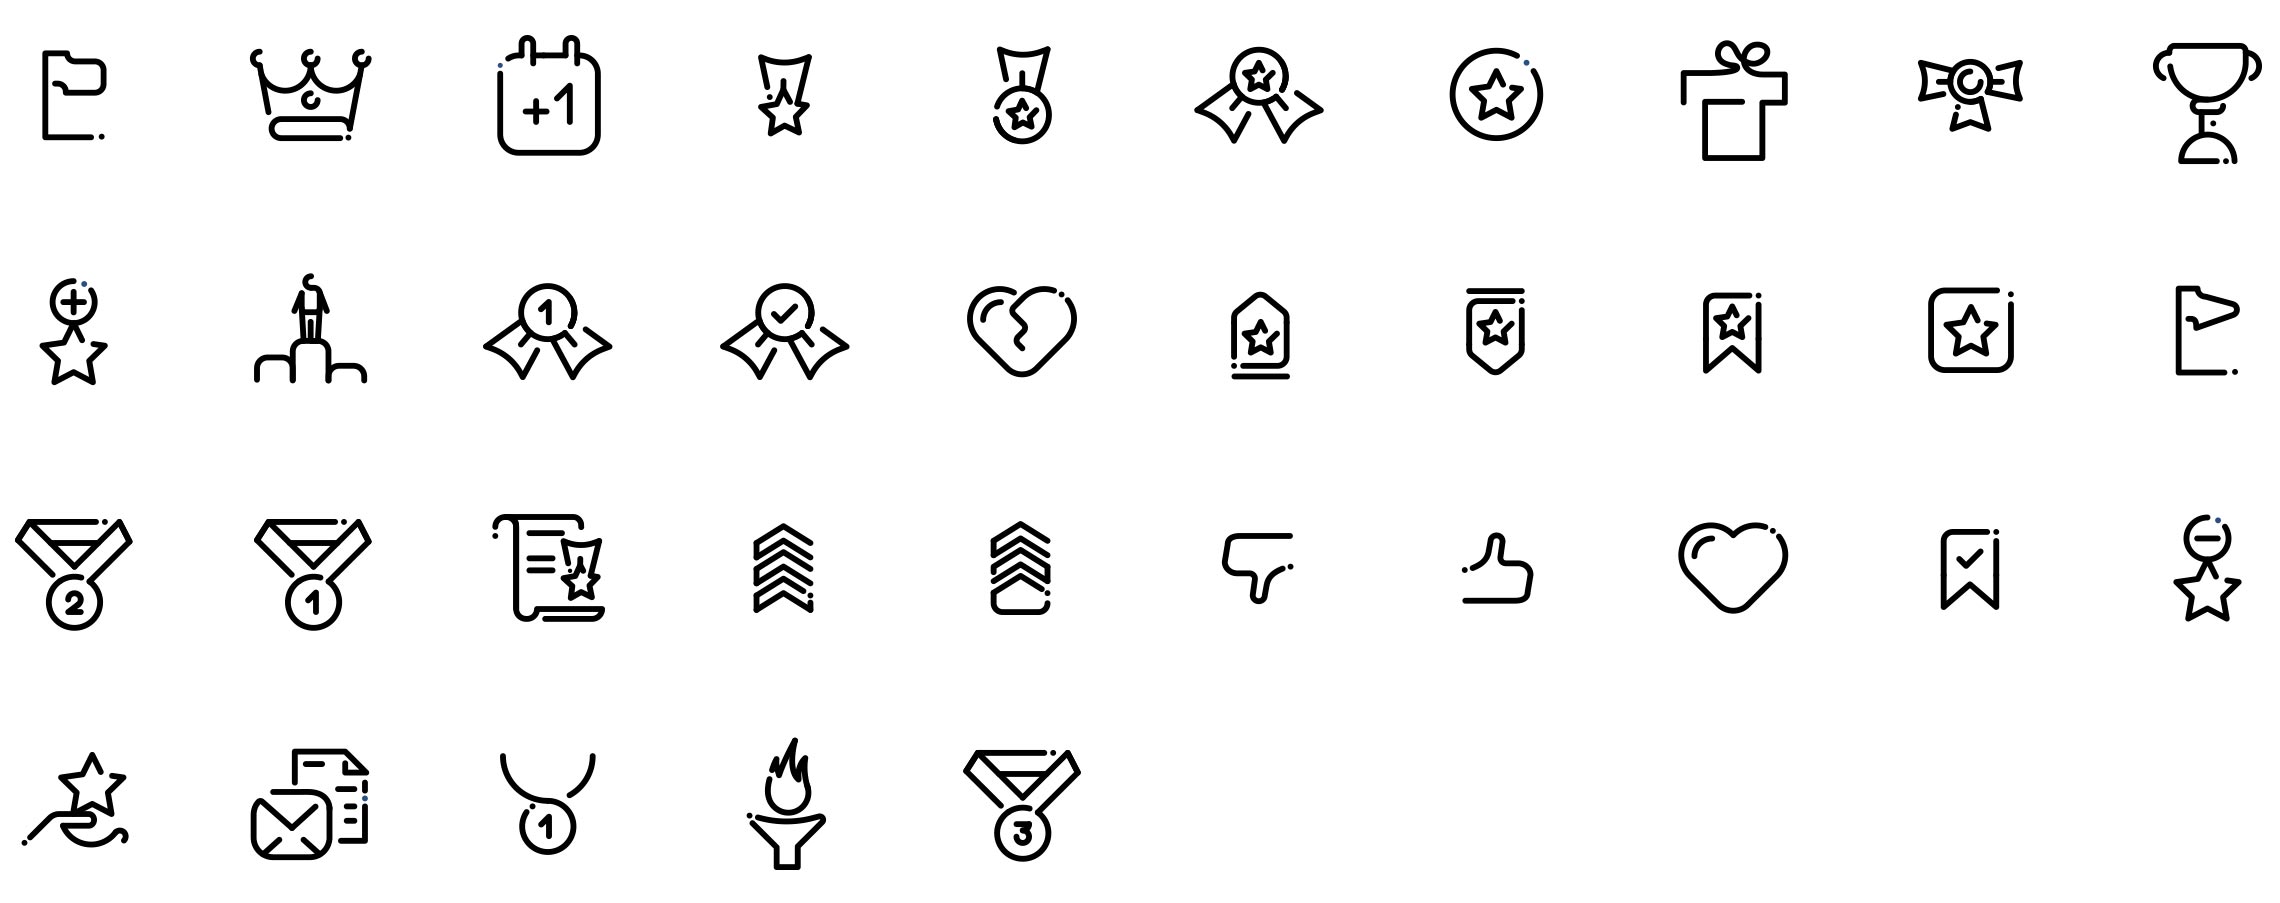 votes-and-rewards-icons-set-preview